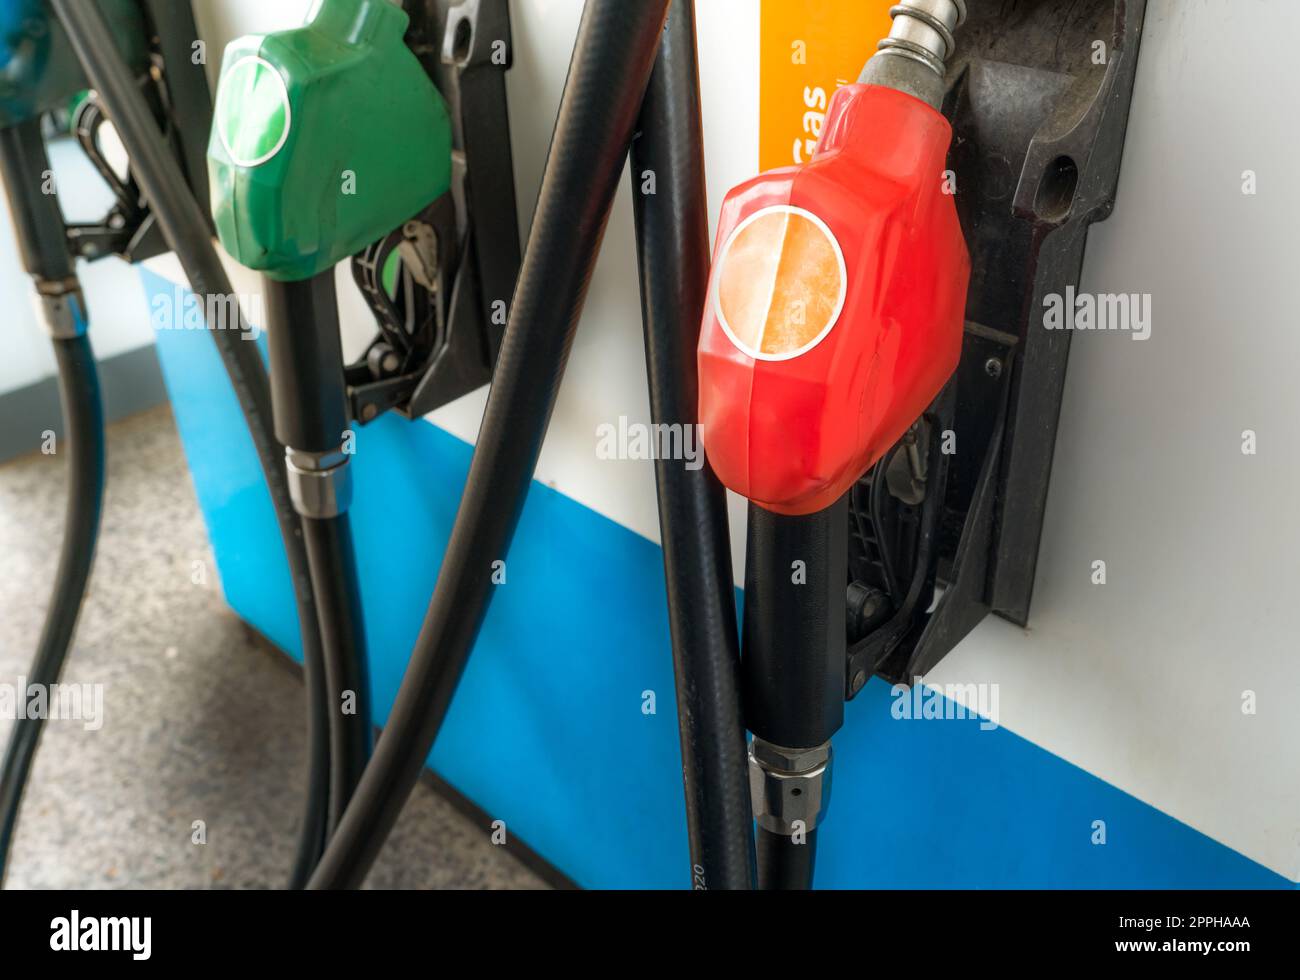 Petrol pump filling fuel nozzle in gas station. Fuel dispenser. Refuel fill up with petrol gasoline. Gas pump handle. Red petrol fuel nozzle. Petroleum oil industry. Oil crisis. Petrol price crisis. Stock Photo